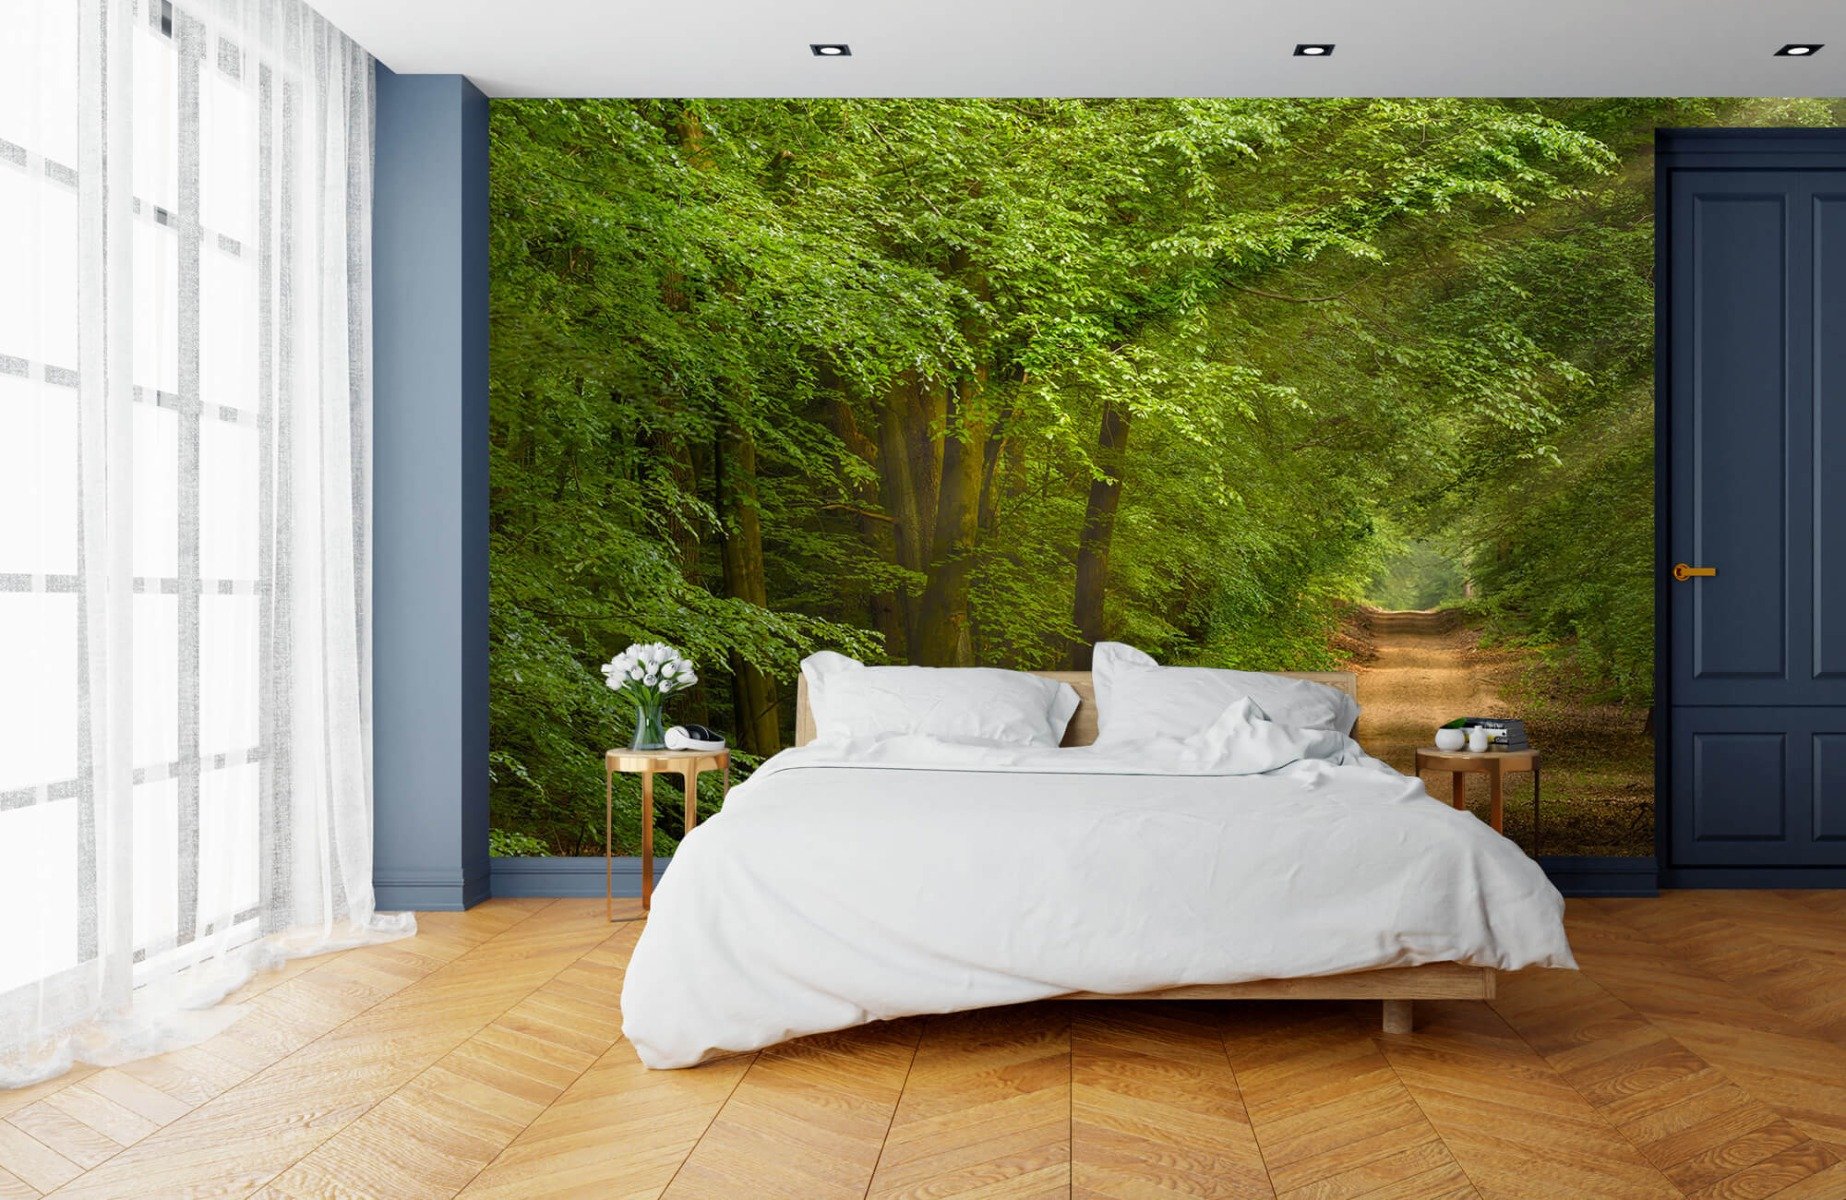 Forest wallpaper - Toad in forest with sunbeams  - Bedroom 15